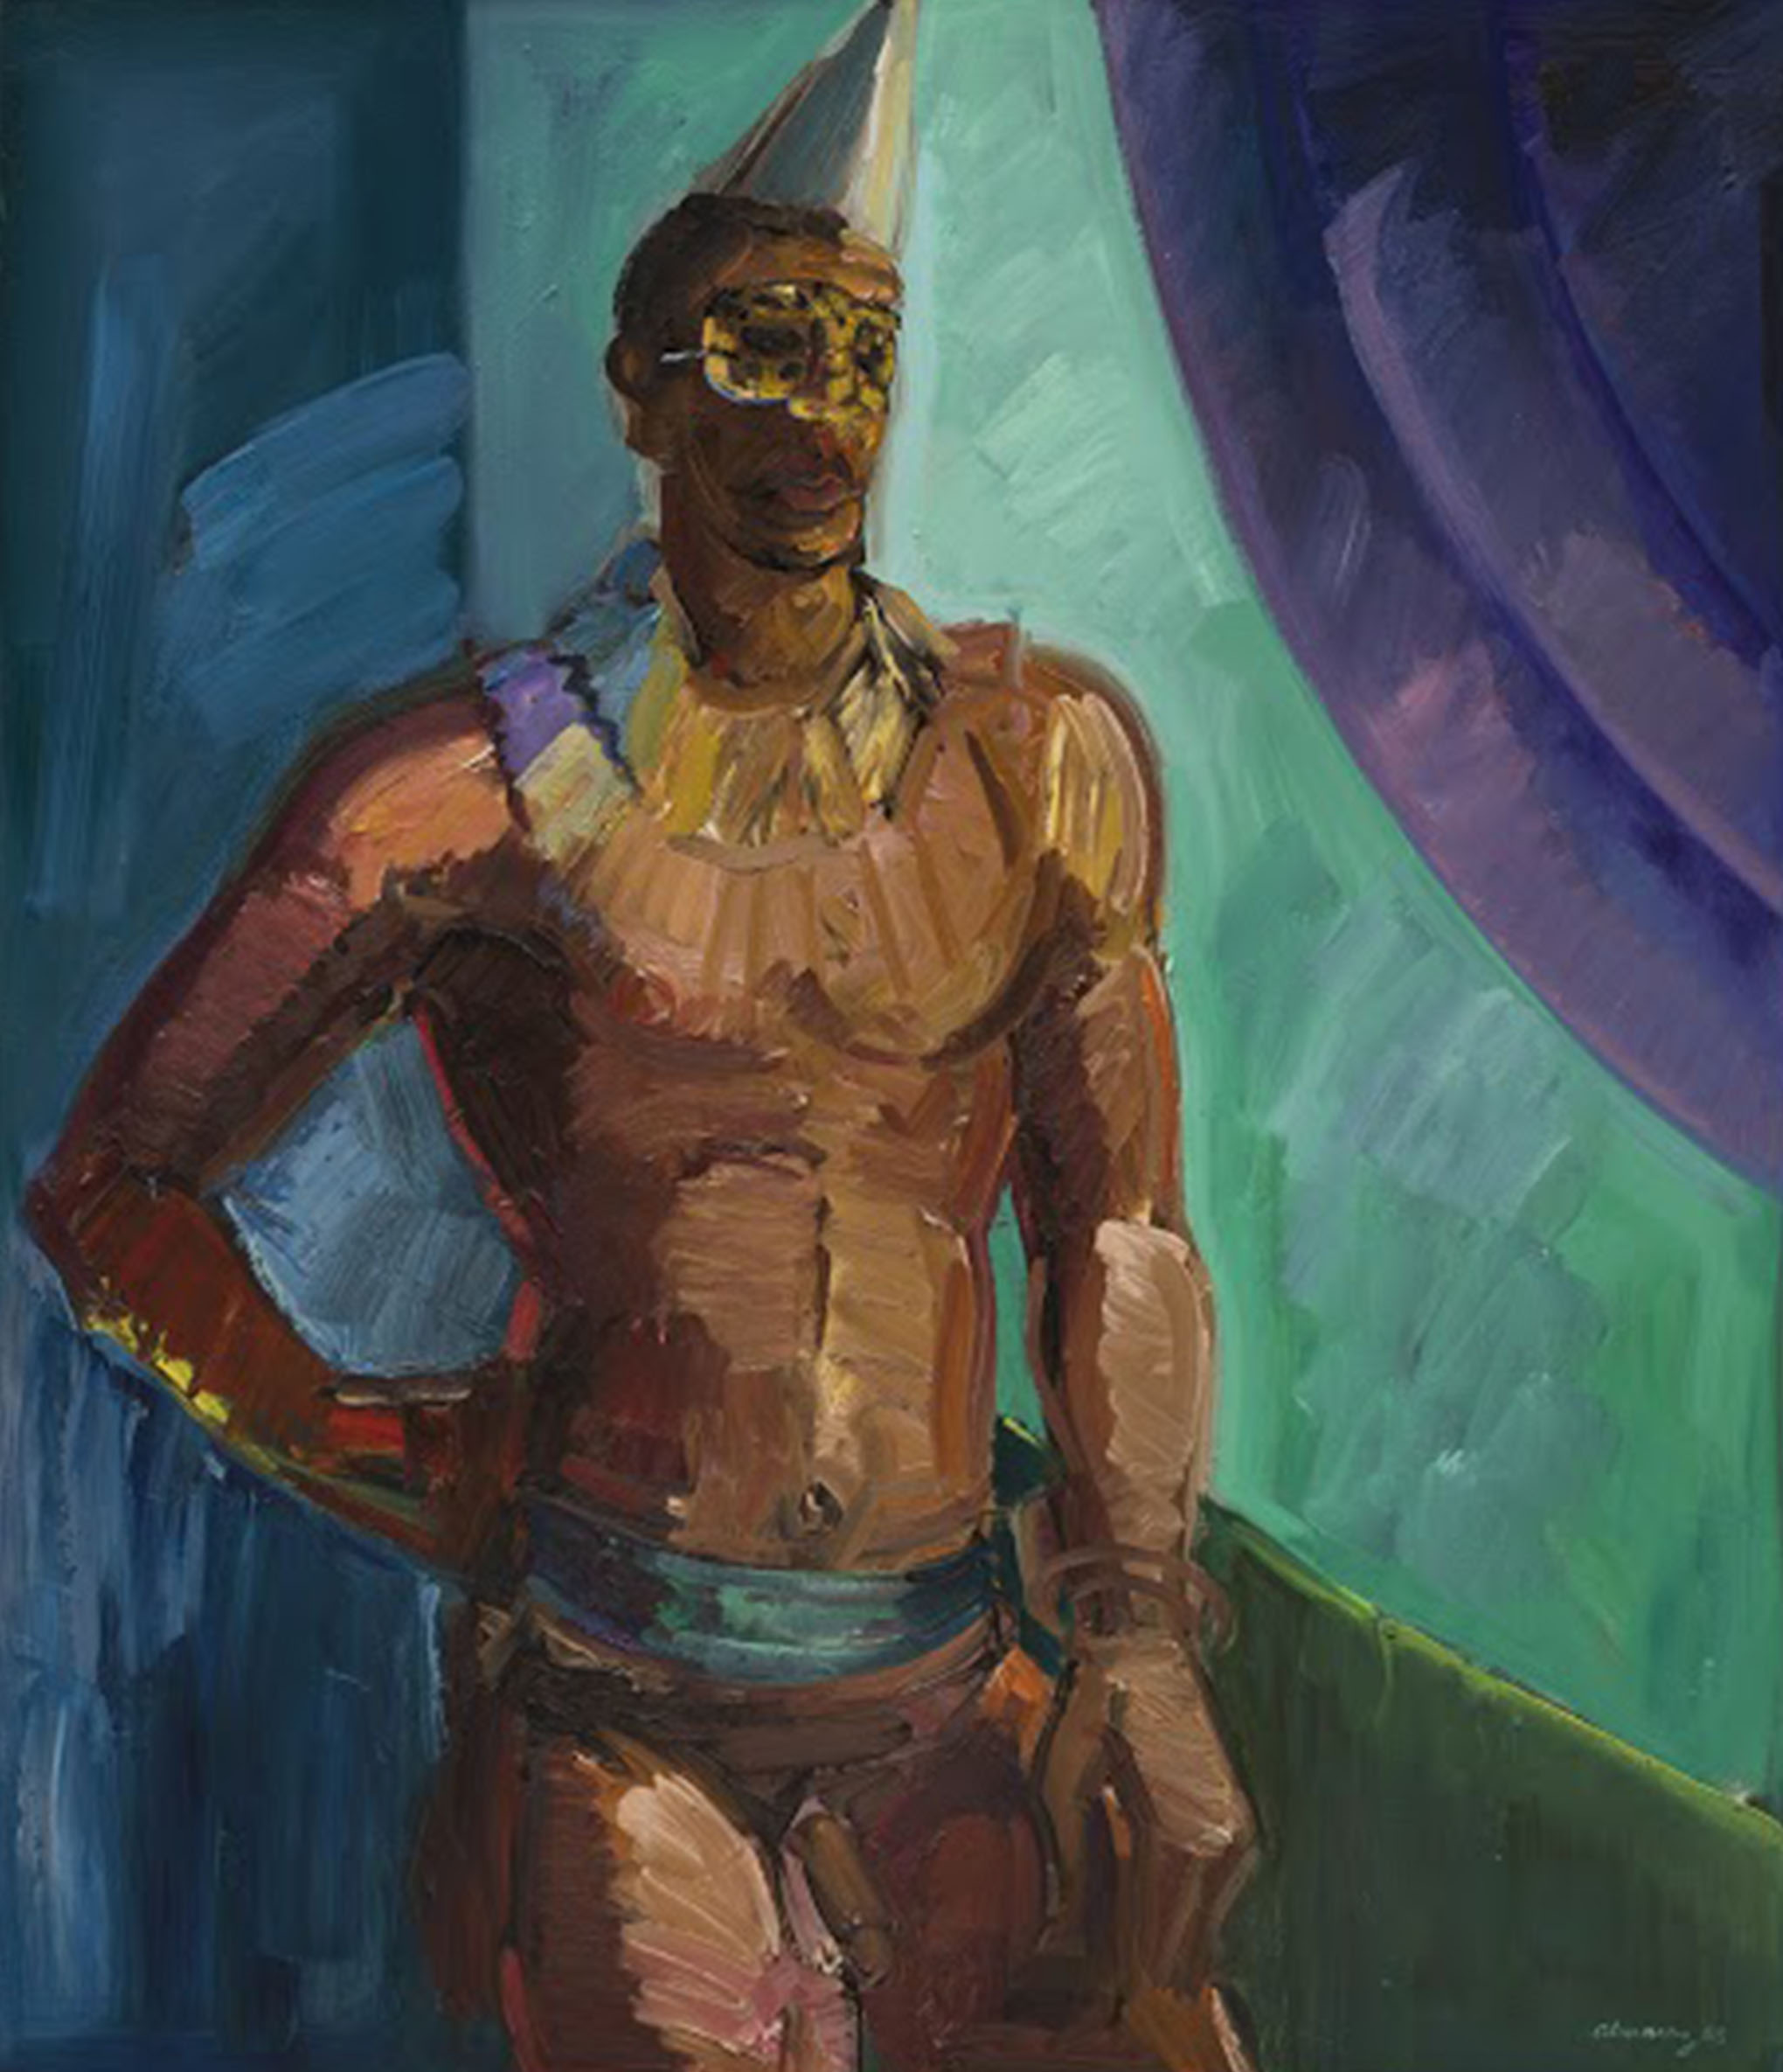 Oil painting of man in mask with birthday hat